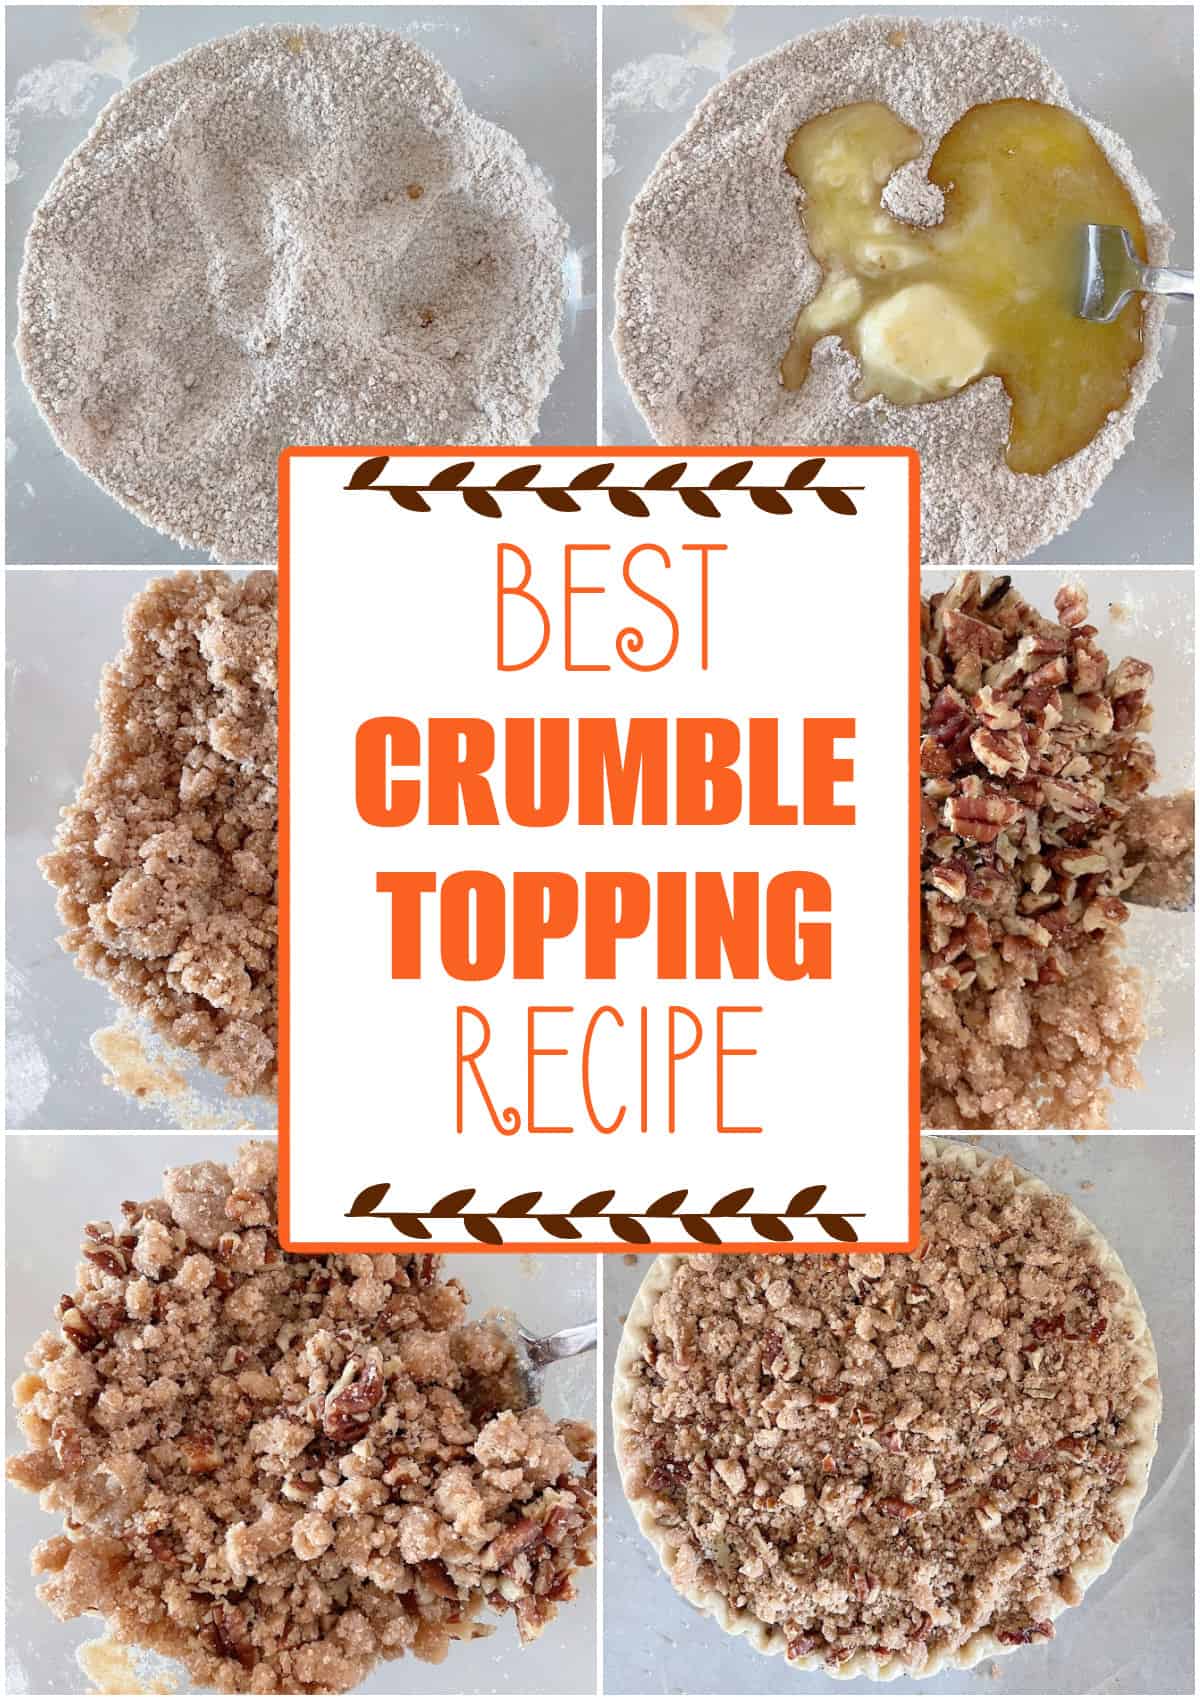 Best Crumble Topping Recipe